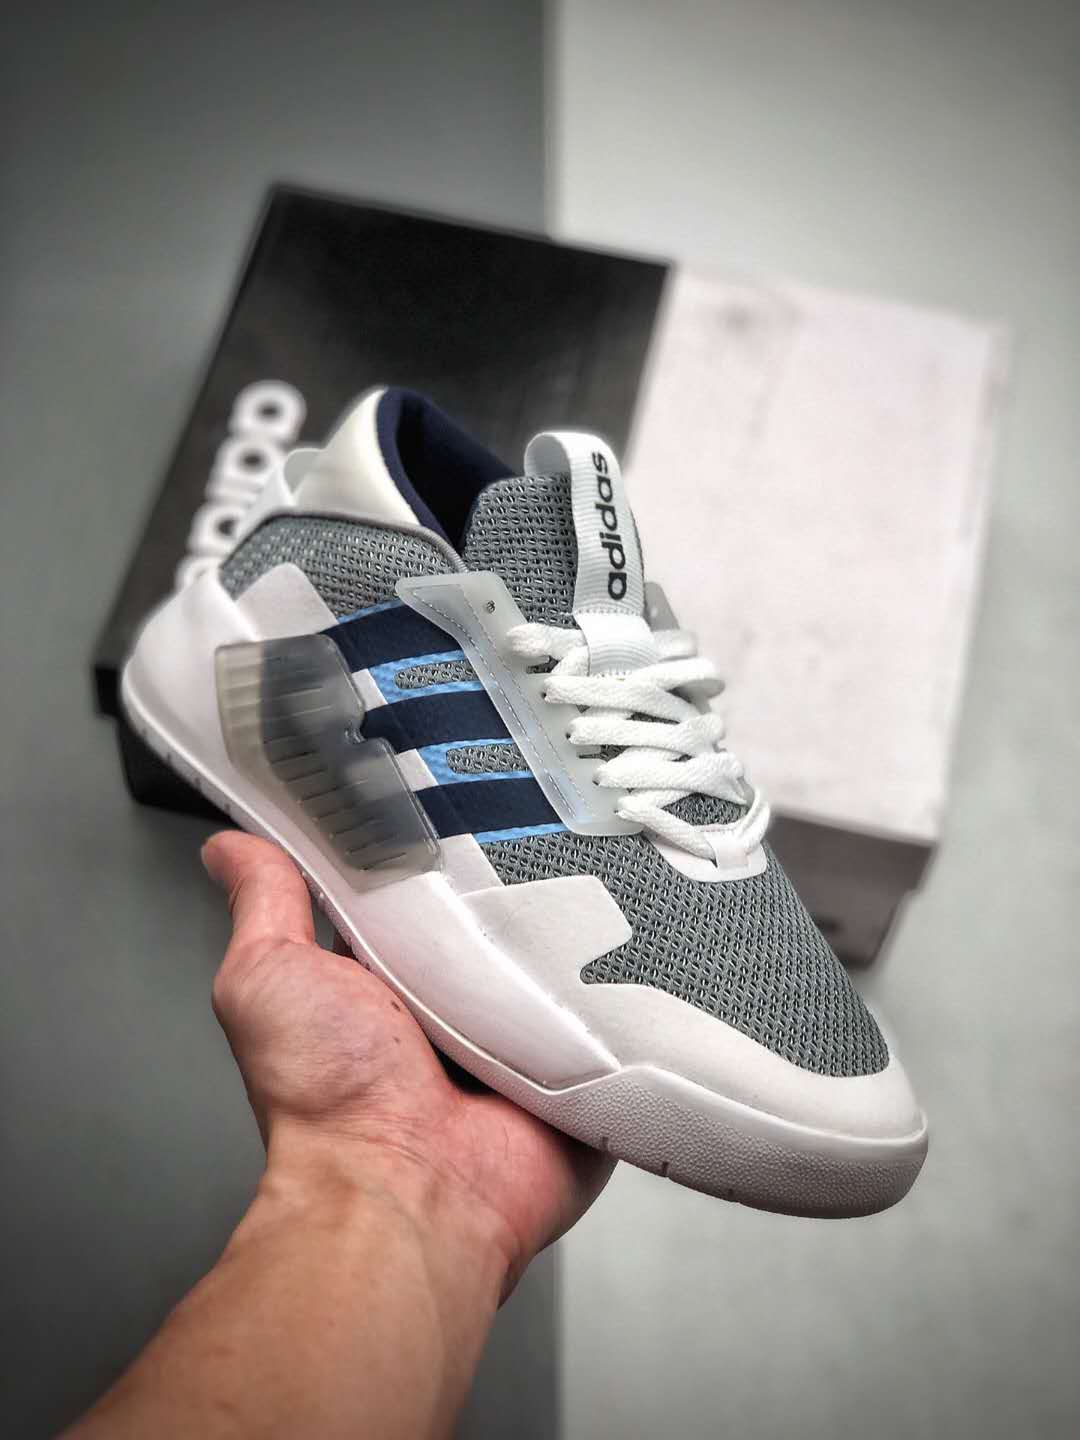 Adidas Neo Bball 90s Grey White Blue EF0636 - Stylish and Sporty Footwear